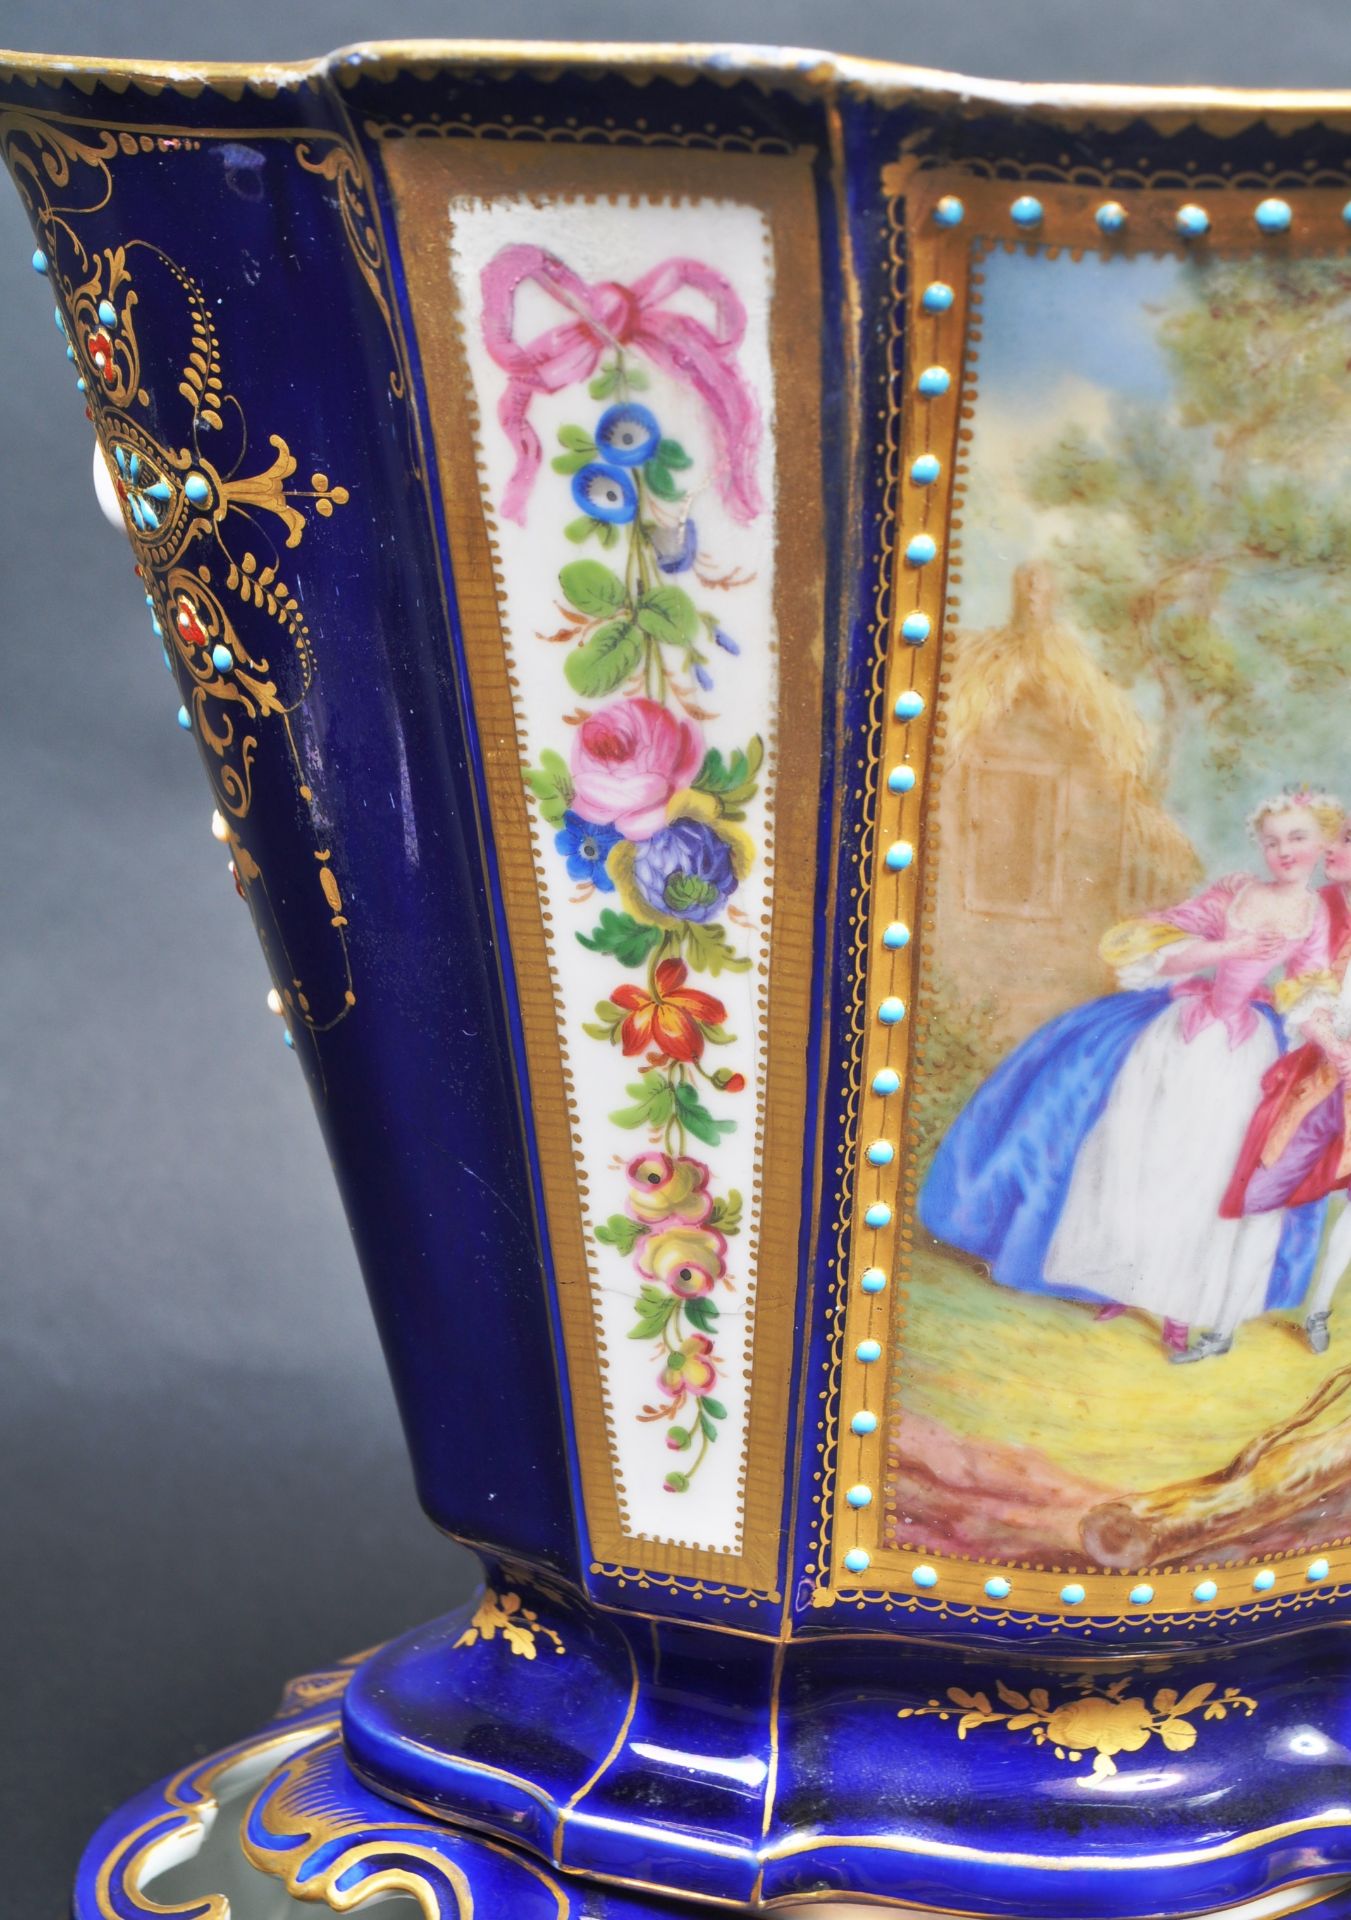 19TH CENTURY FRENCH SEVRES PORCELAIN CENTREPIECE VASE - Image 3 of 10